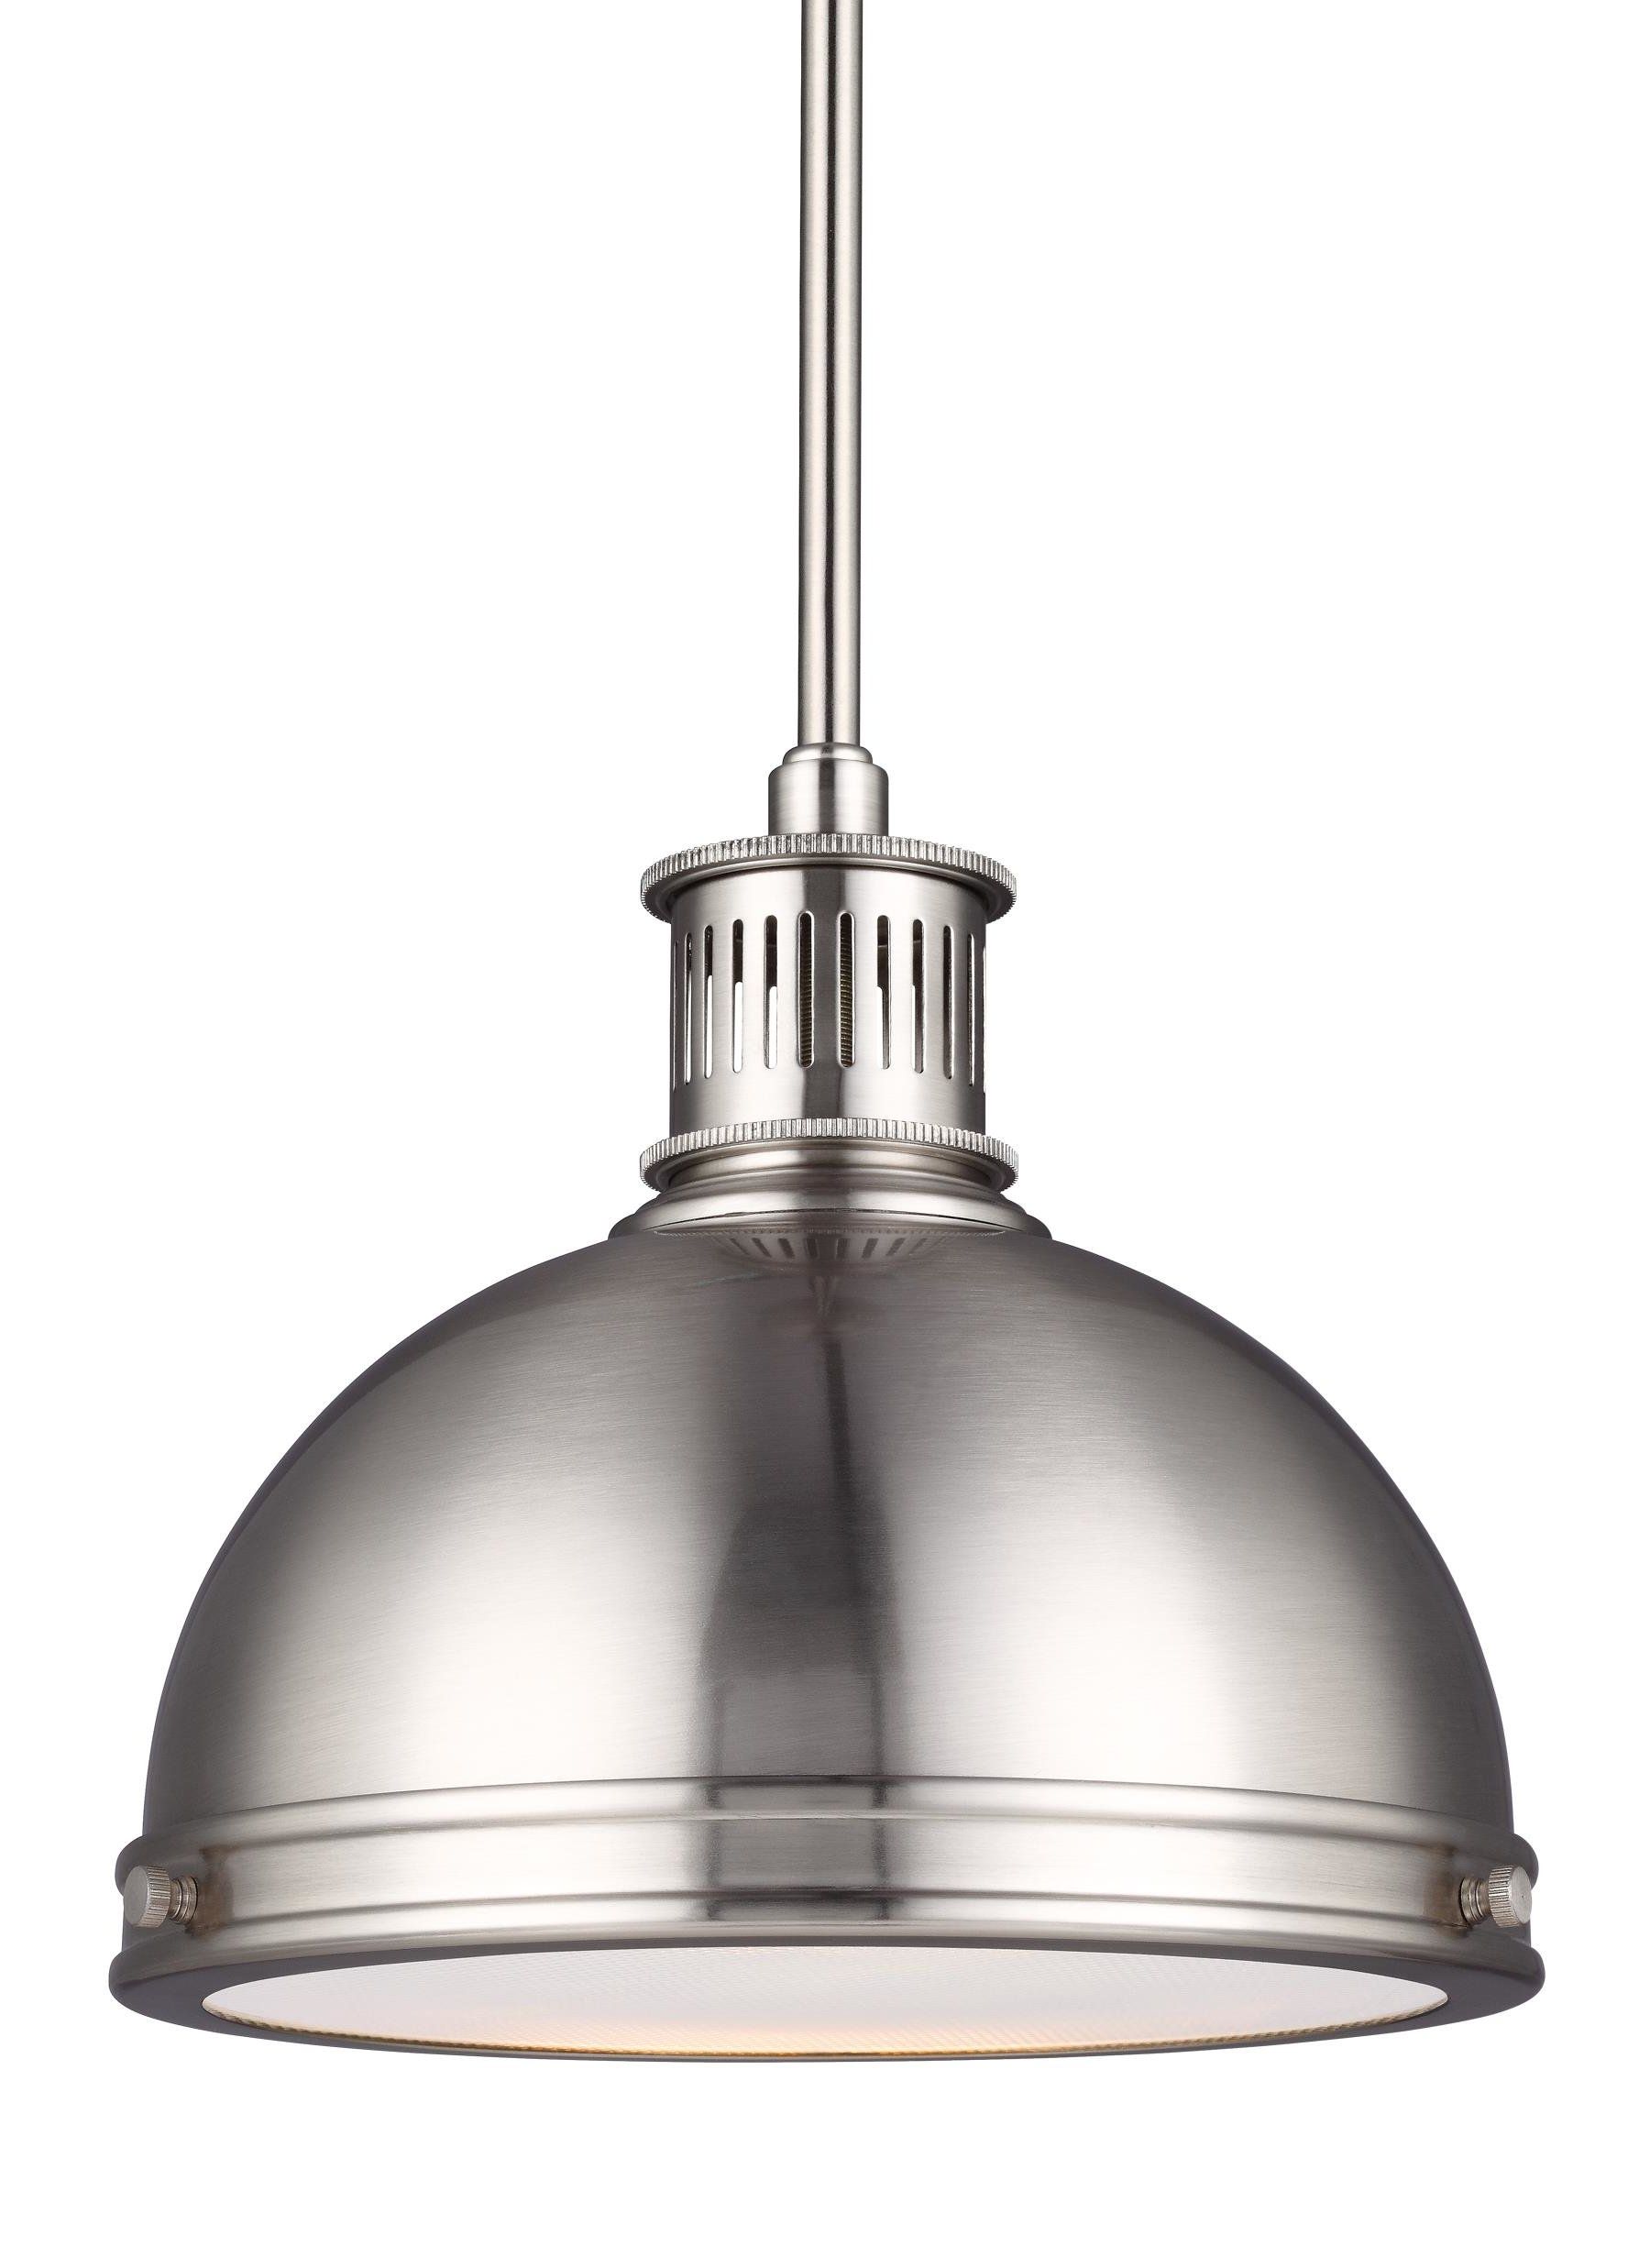 Most Popular Ninette 1 Light Dome Pendants In Orchard Hill 1 Light Led Dome Pendant (View 10 of 20)